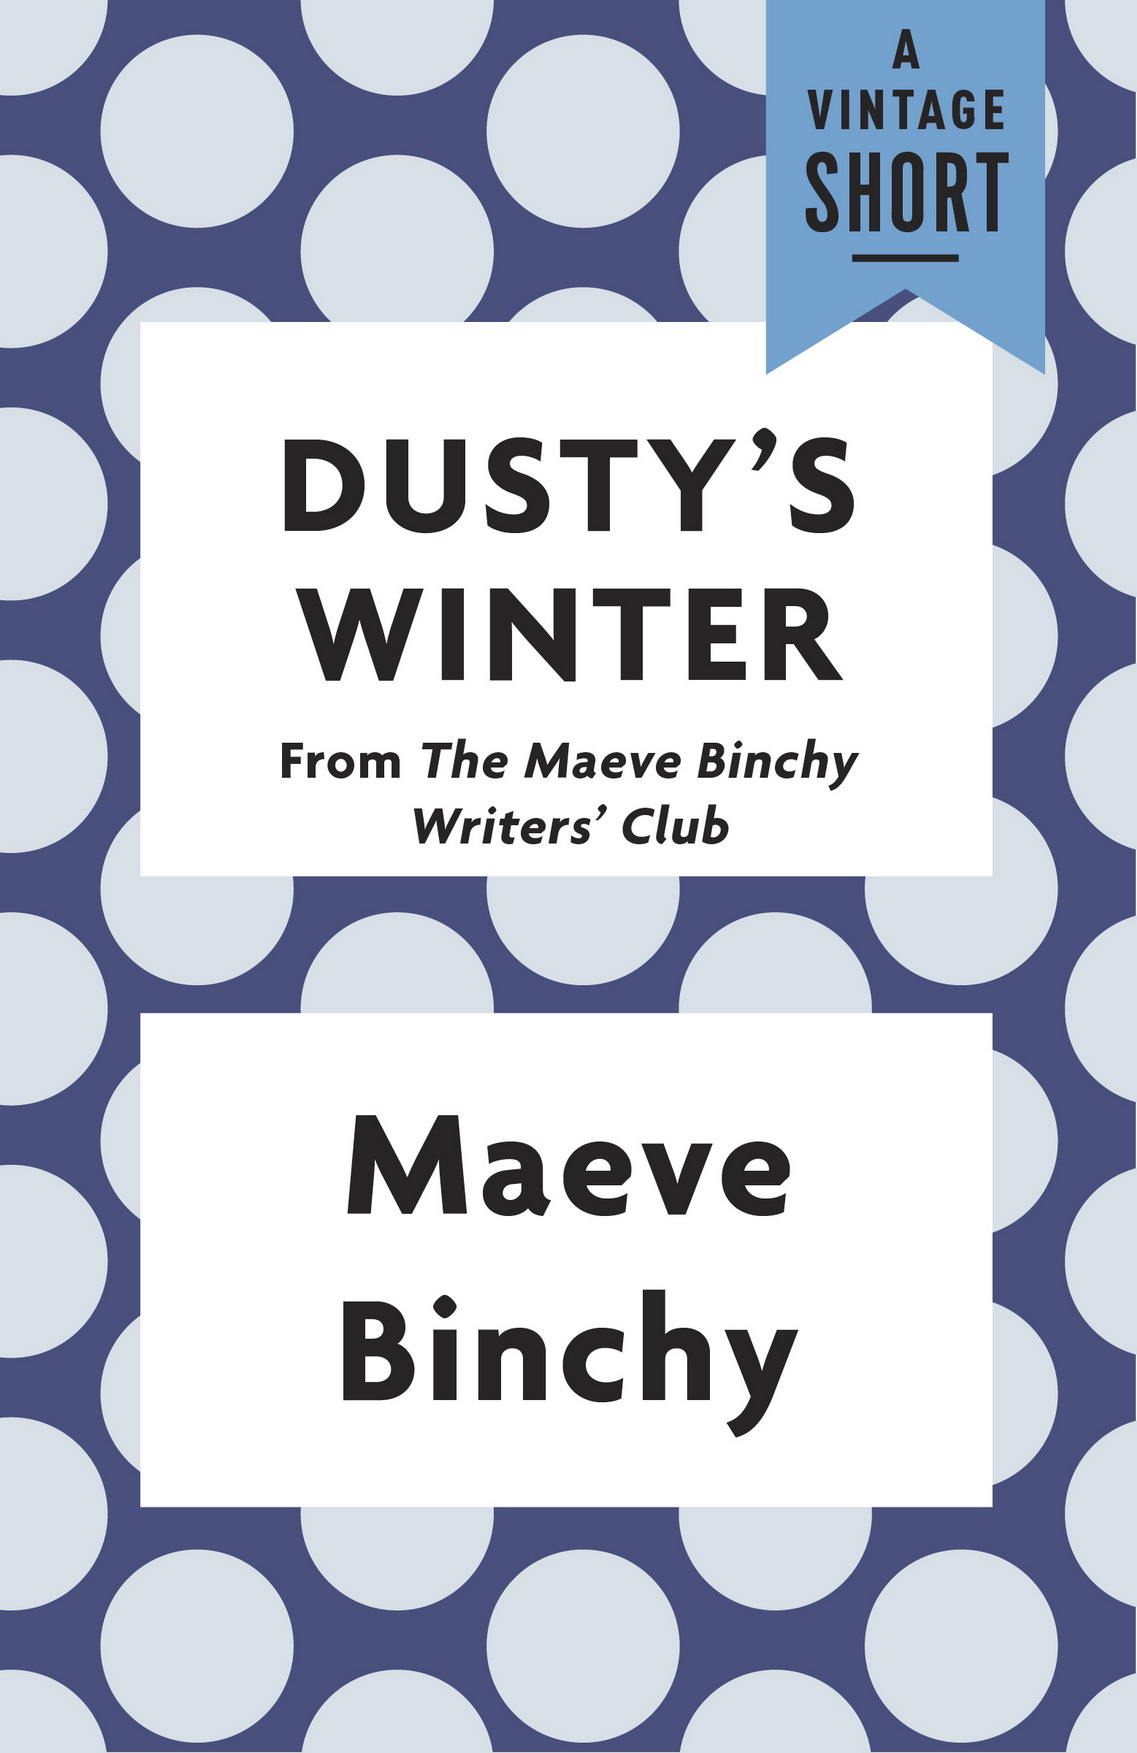 Dusty's Winter: From the Maeve Binchy Writers' Club